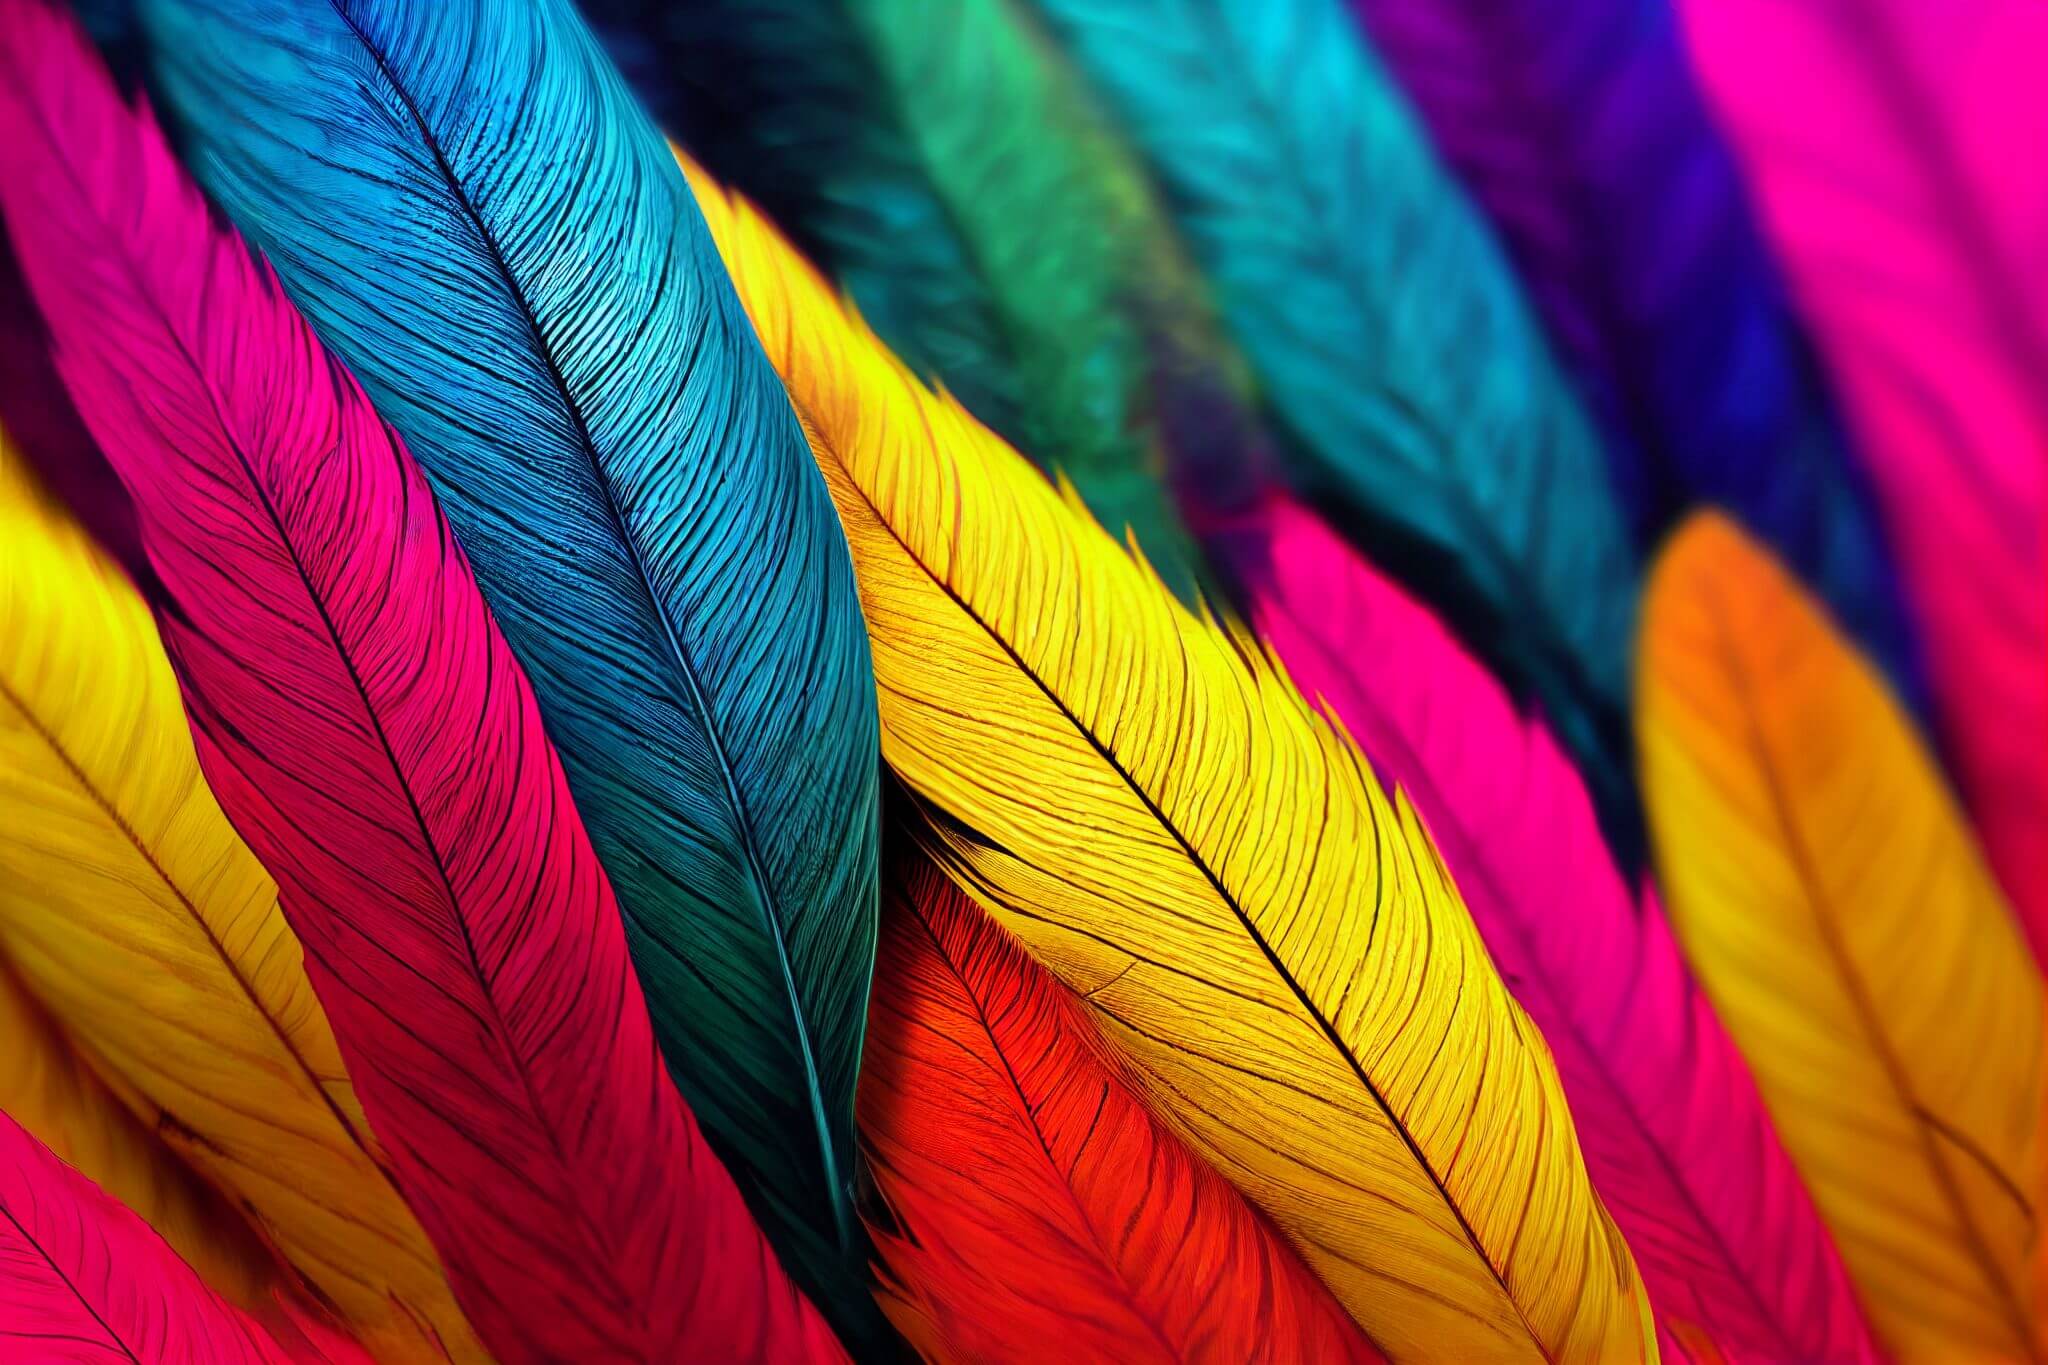 Feathers have been used in witchcraft and other spiritual practices for thousands of years, and they hold a variety of meanings and uses depending on the culture and tradition.